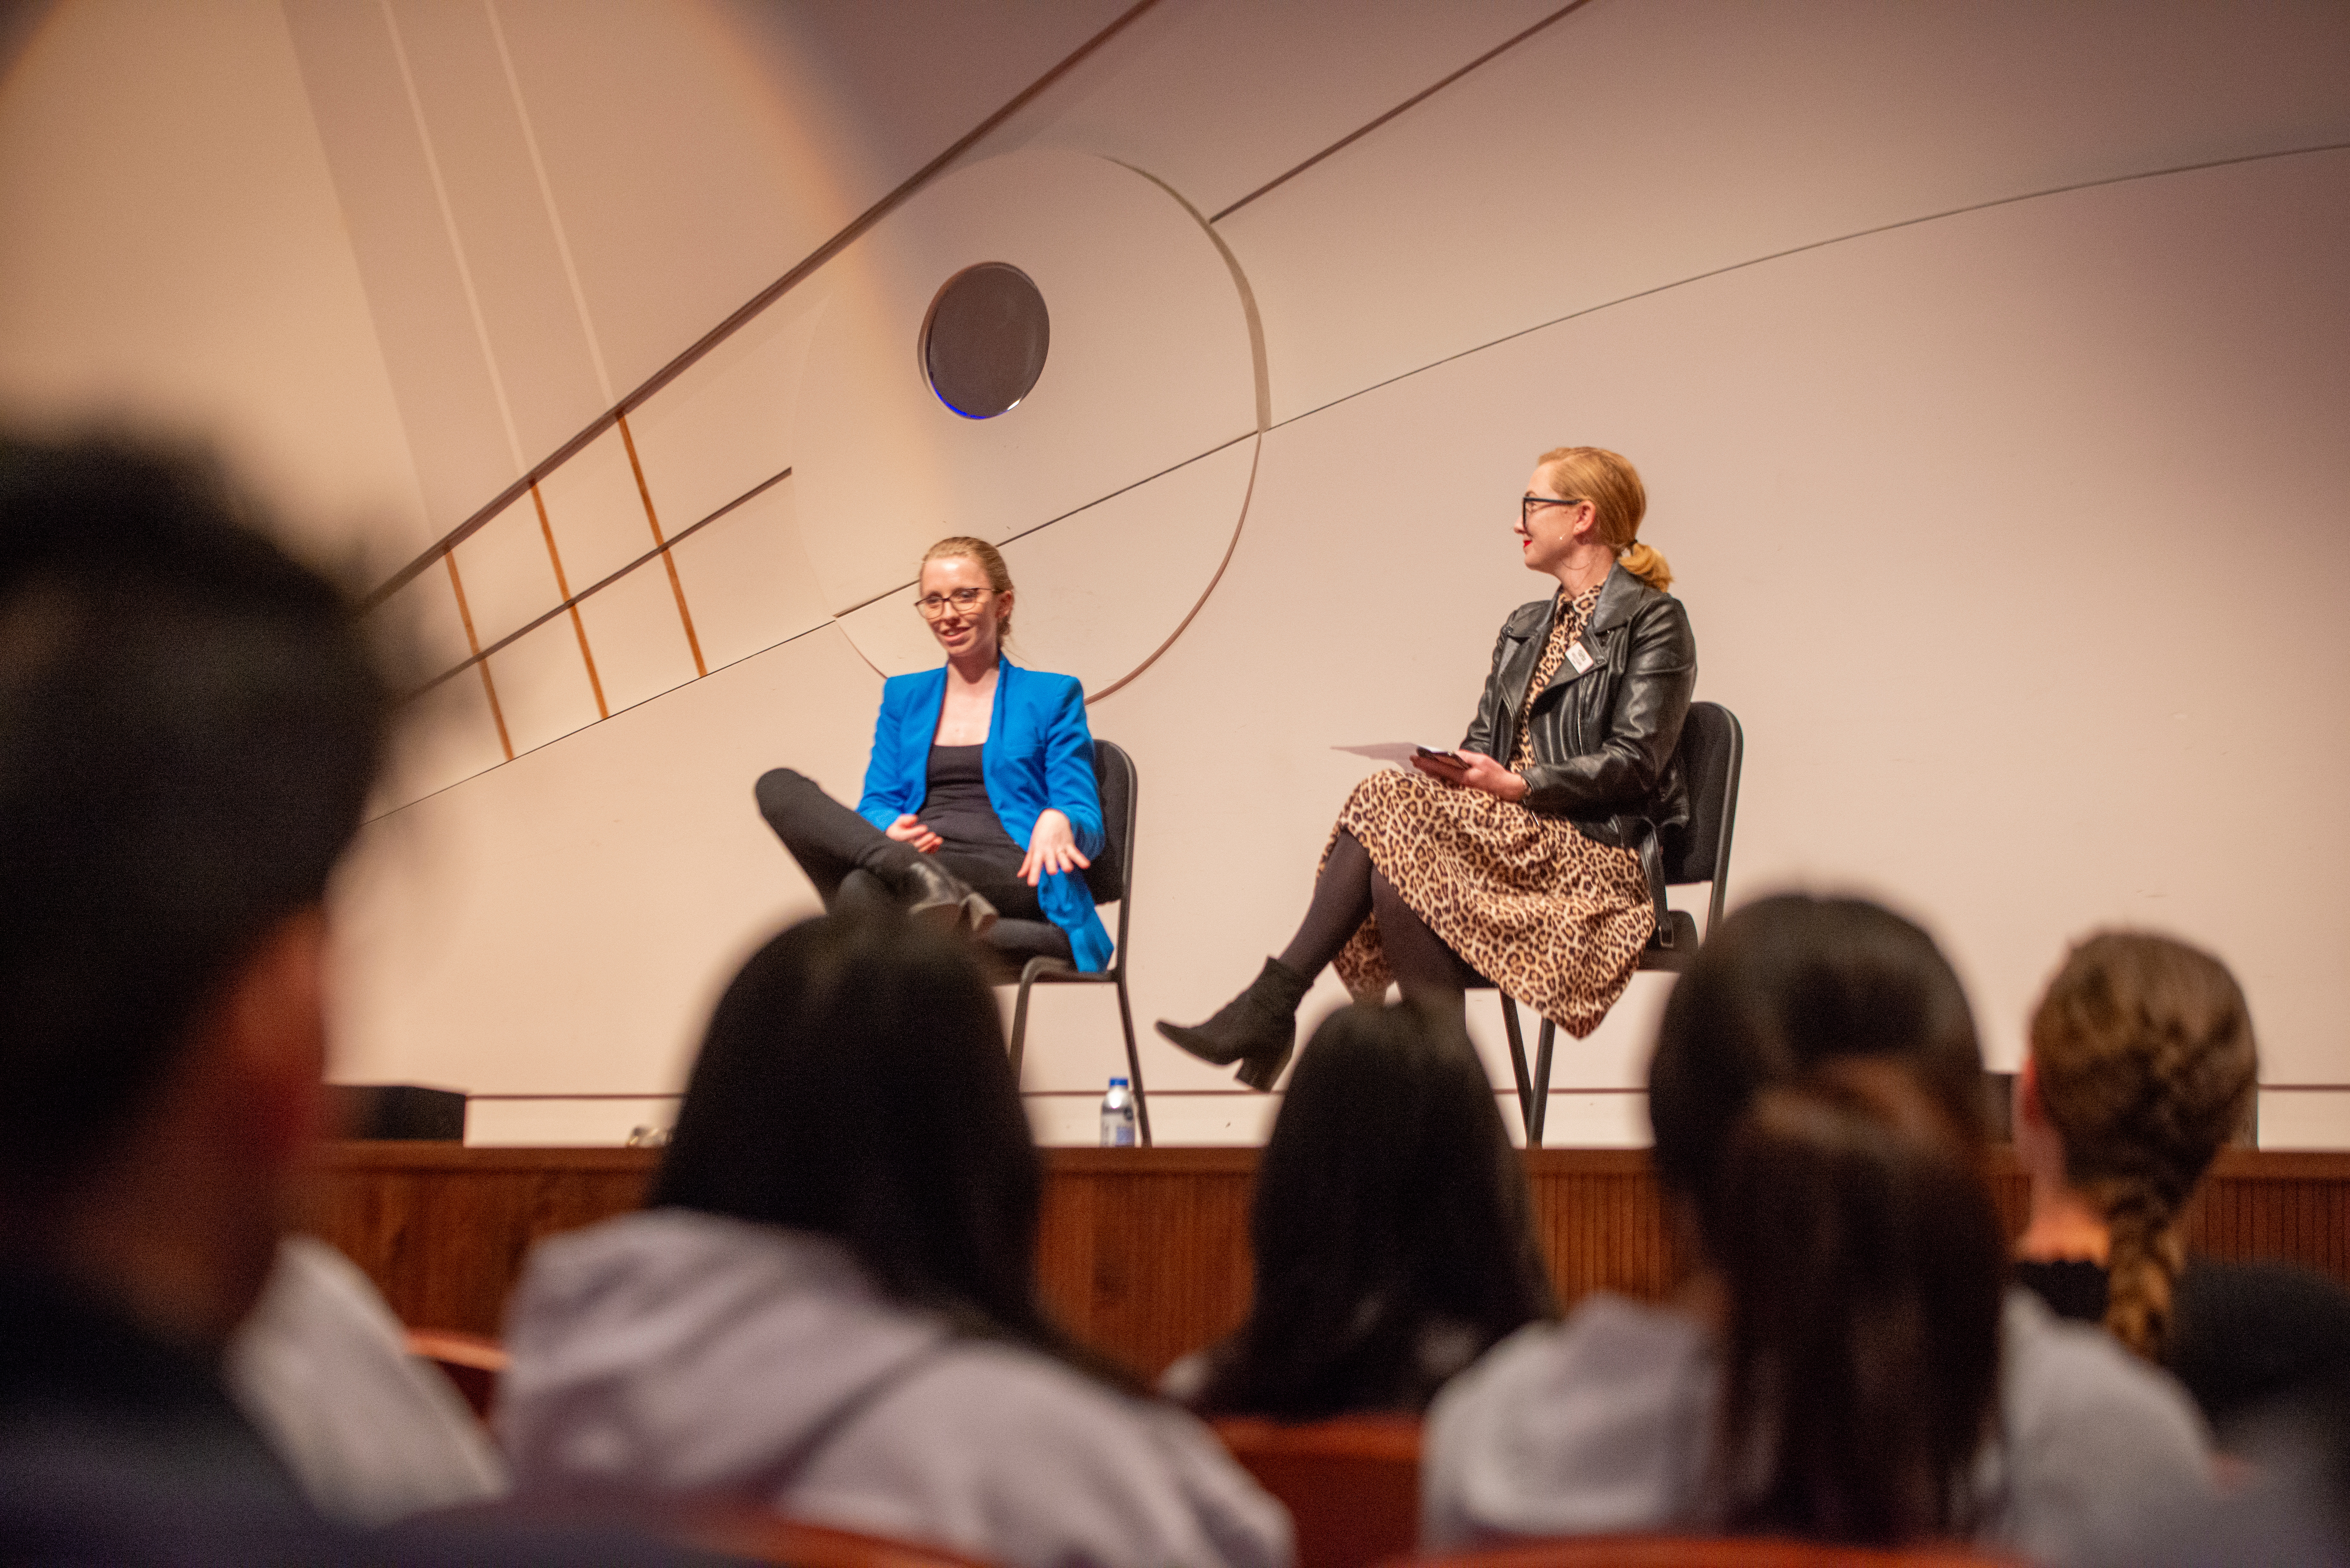 Anna Lapwood, left, and Molly Clark, right, sit on chairs onstage as students sit in the audience.